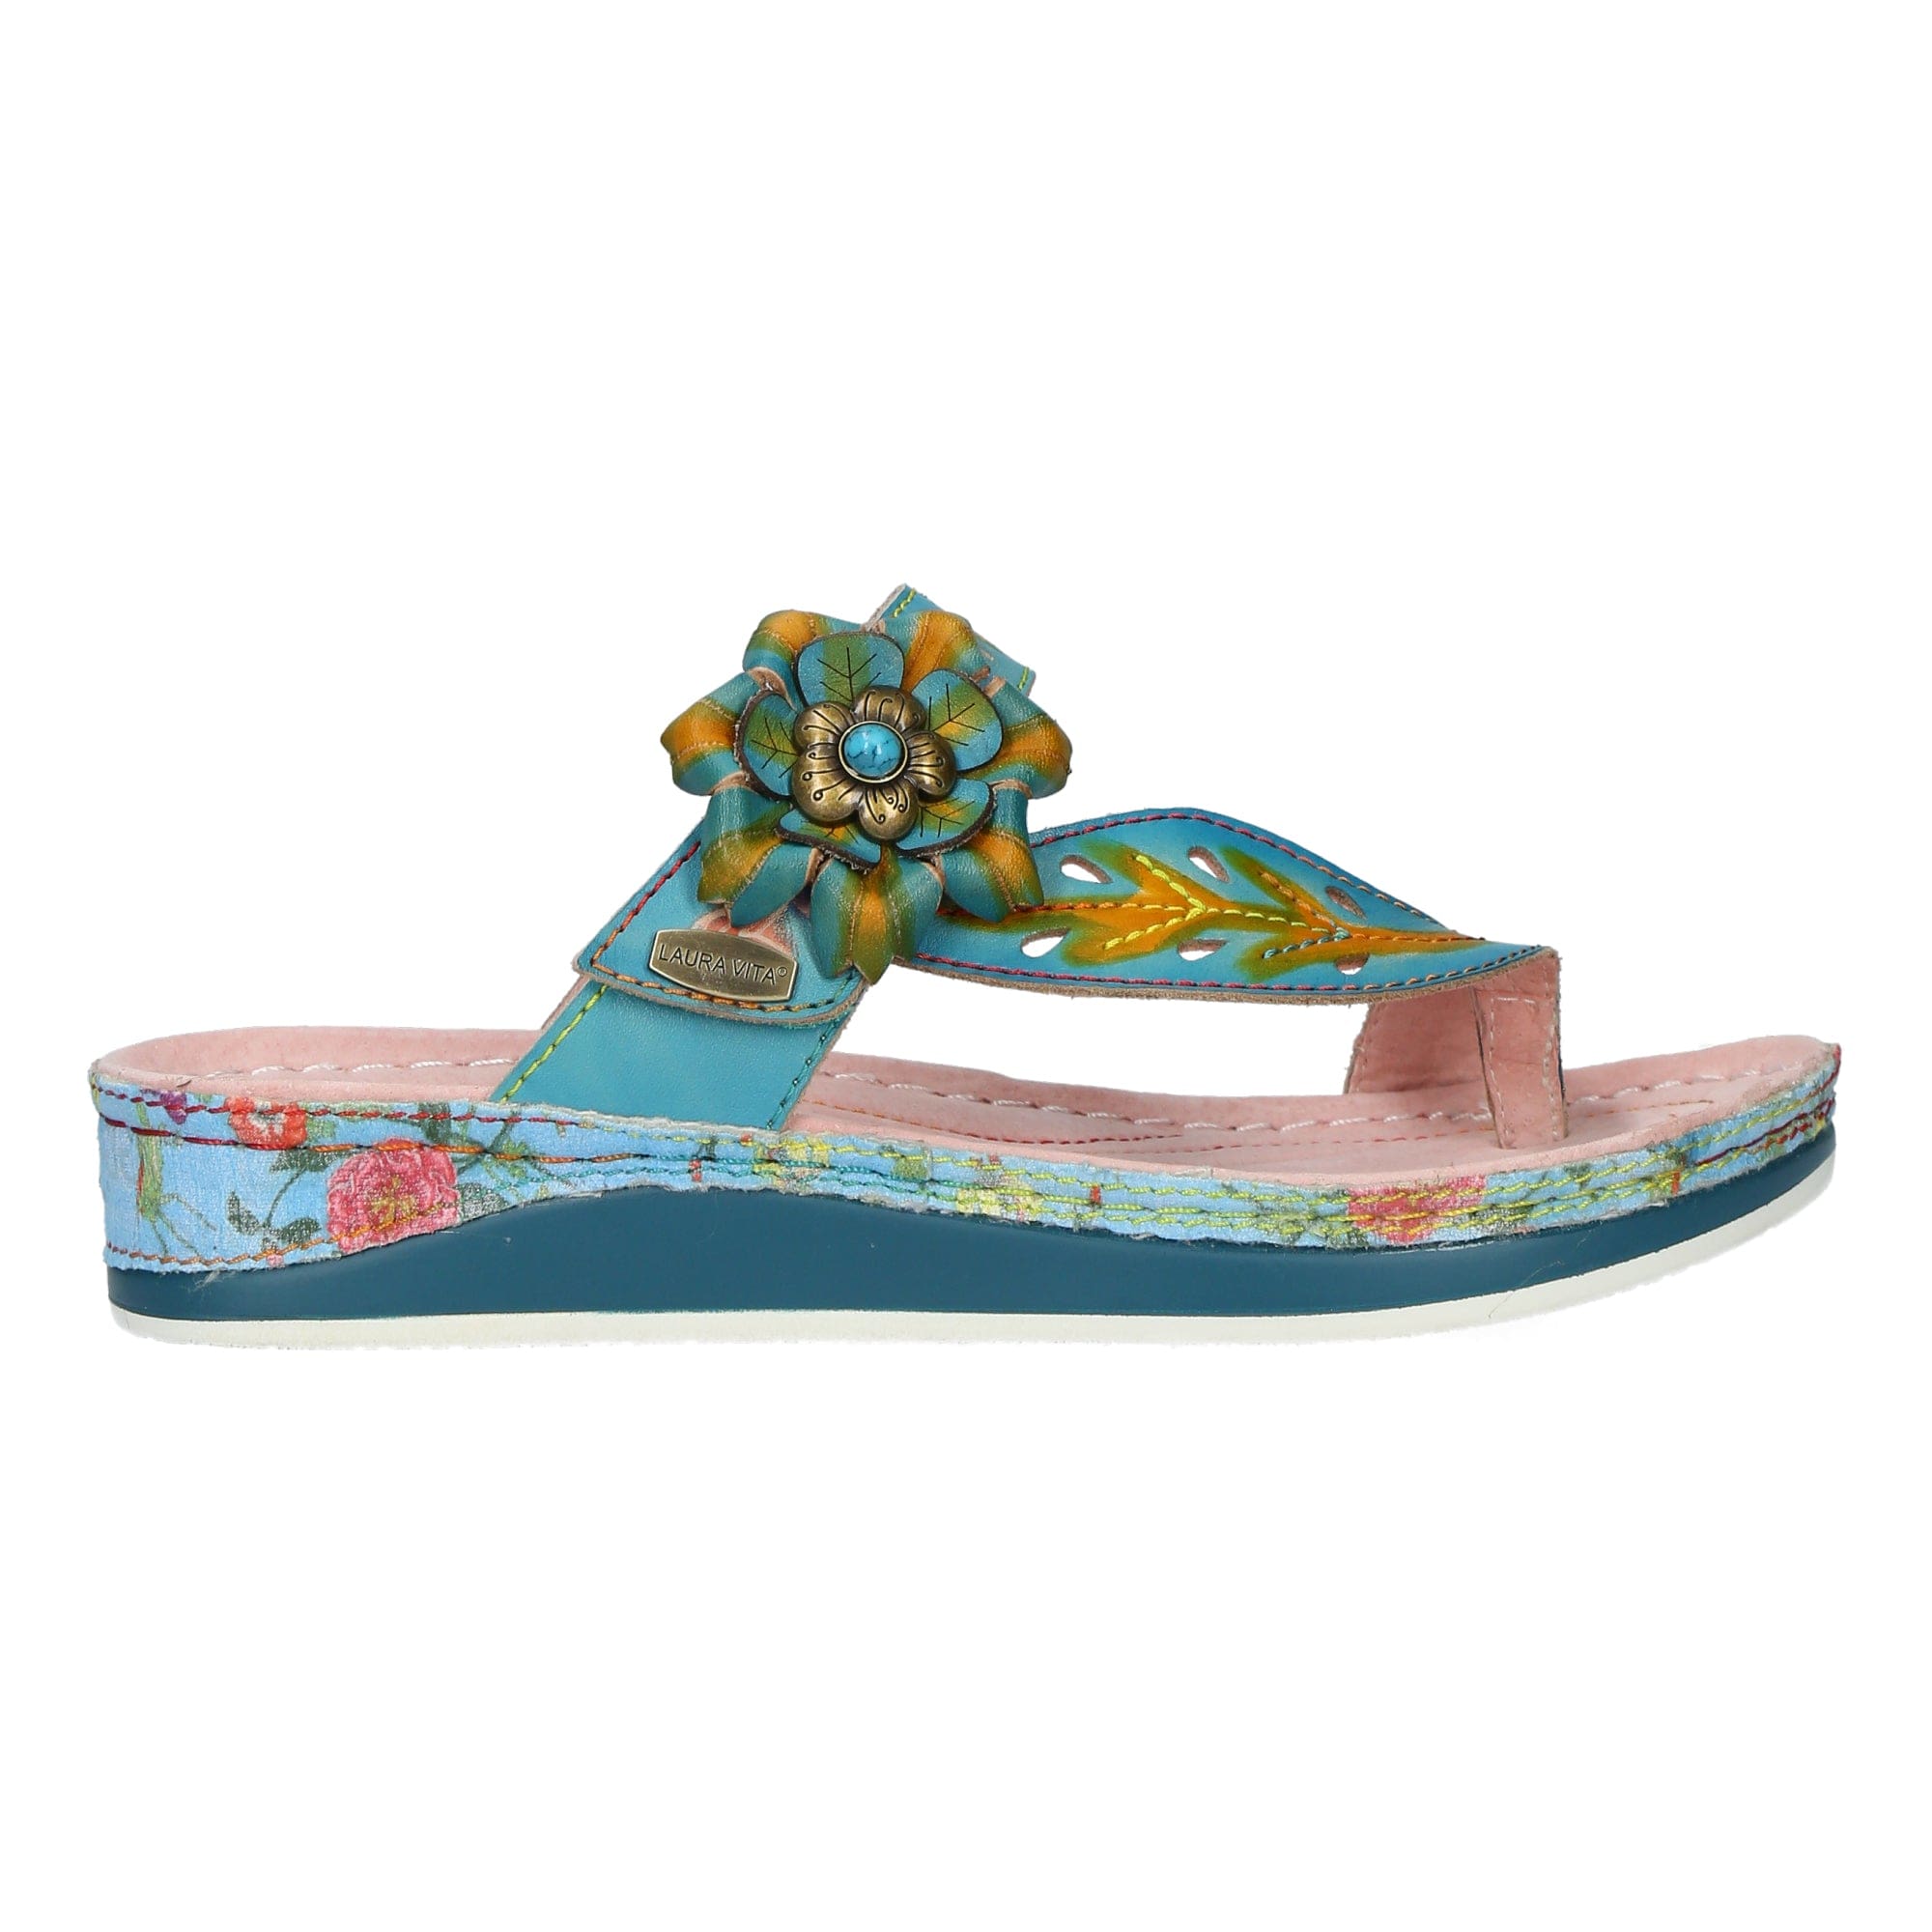 Chaussure BRCUELO 298 - 35 / Turquoise - Mule